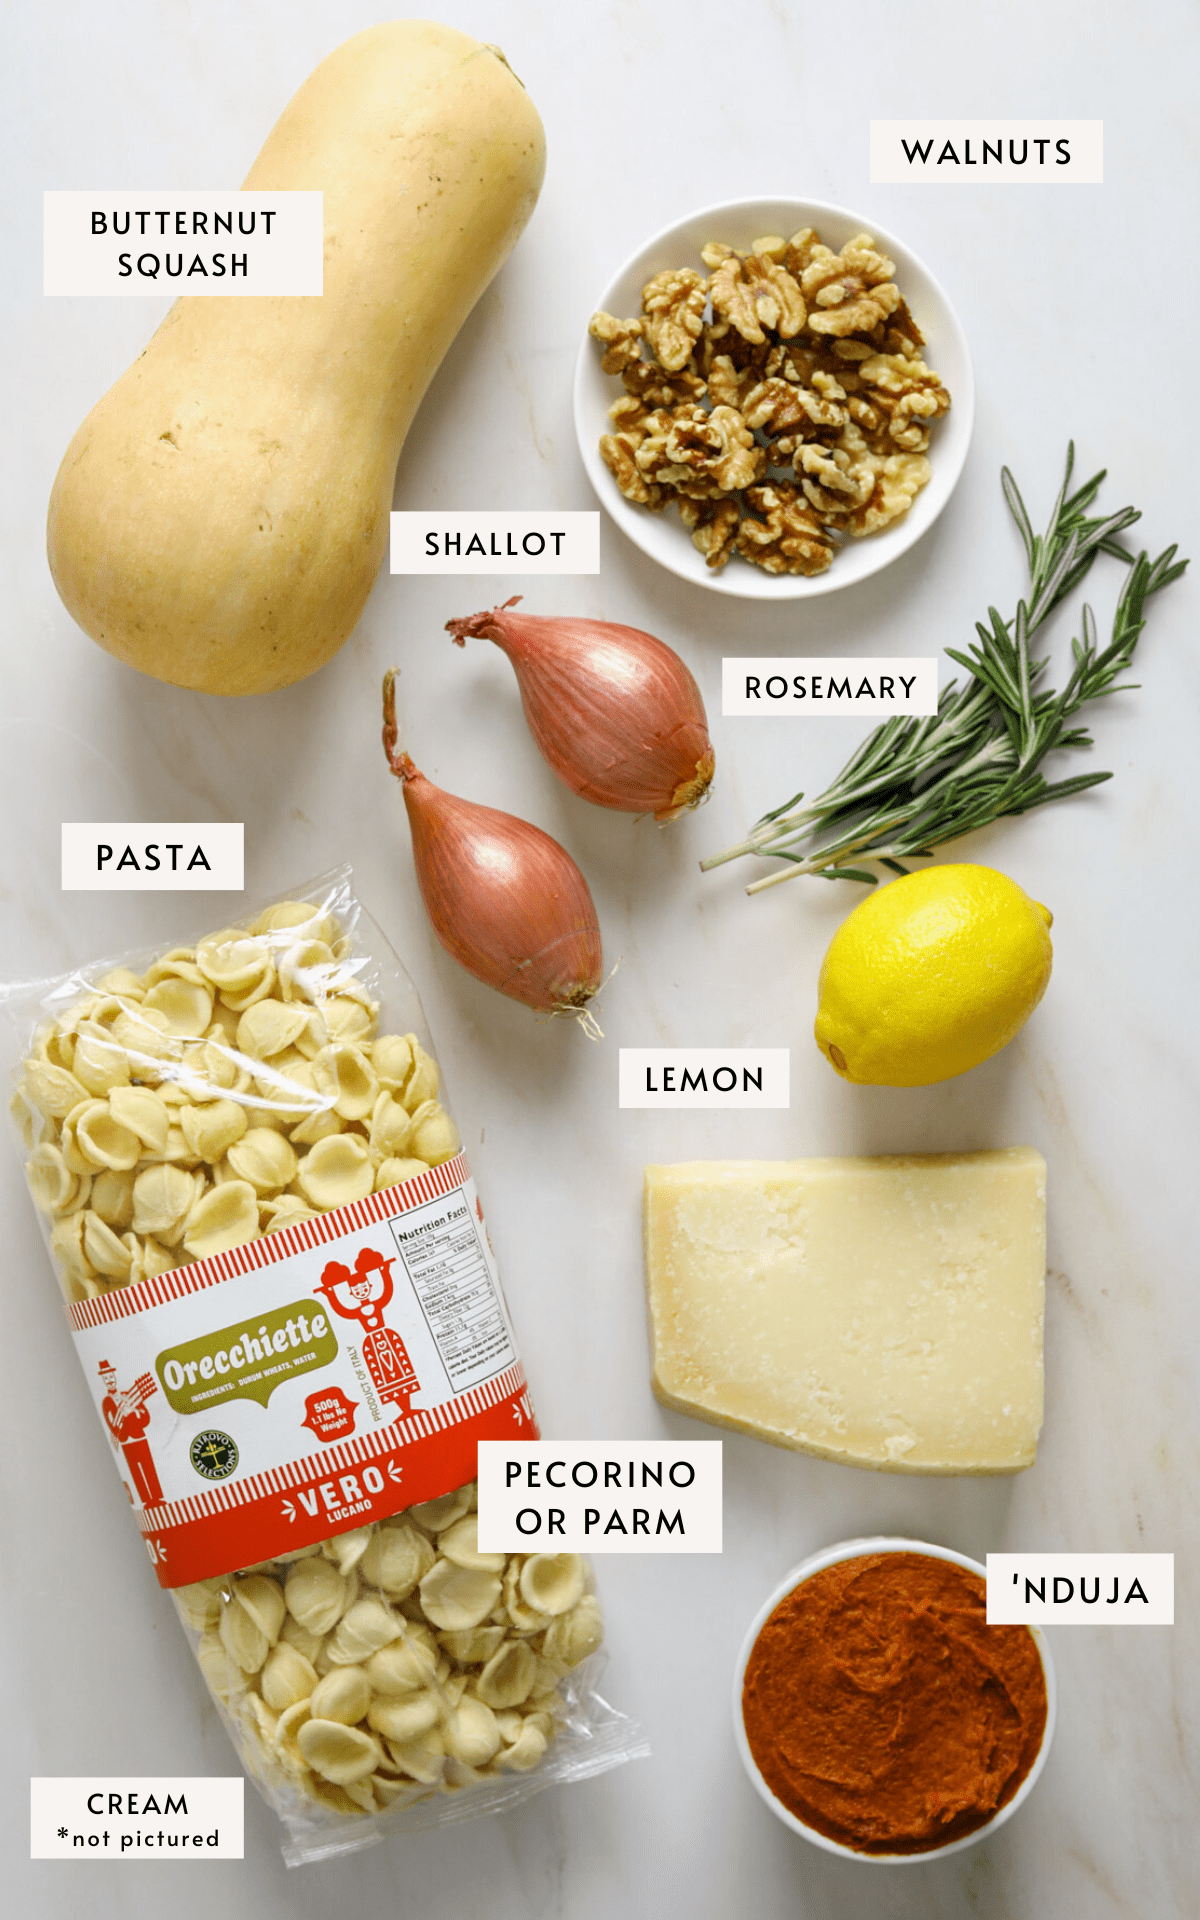 A whole butternut squash, a lemon, two sprigs of rosemary, a small white dish with walnuts, a small white bowl of 'Nduja, a package of dried pasta, two whole shallots and a hunk of pecorino cheese.